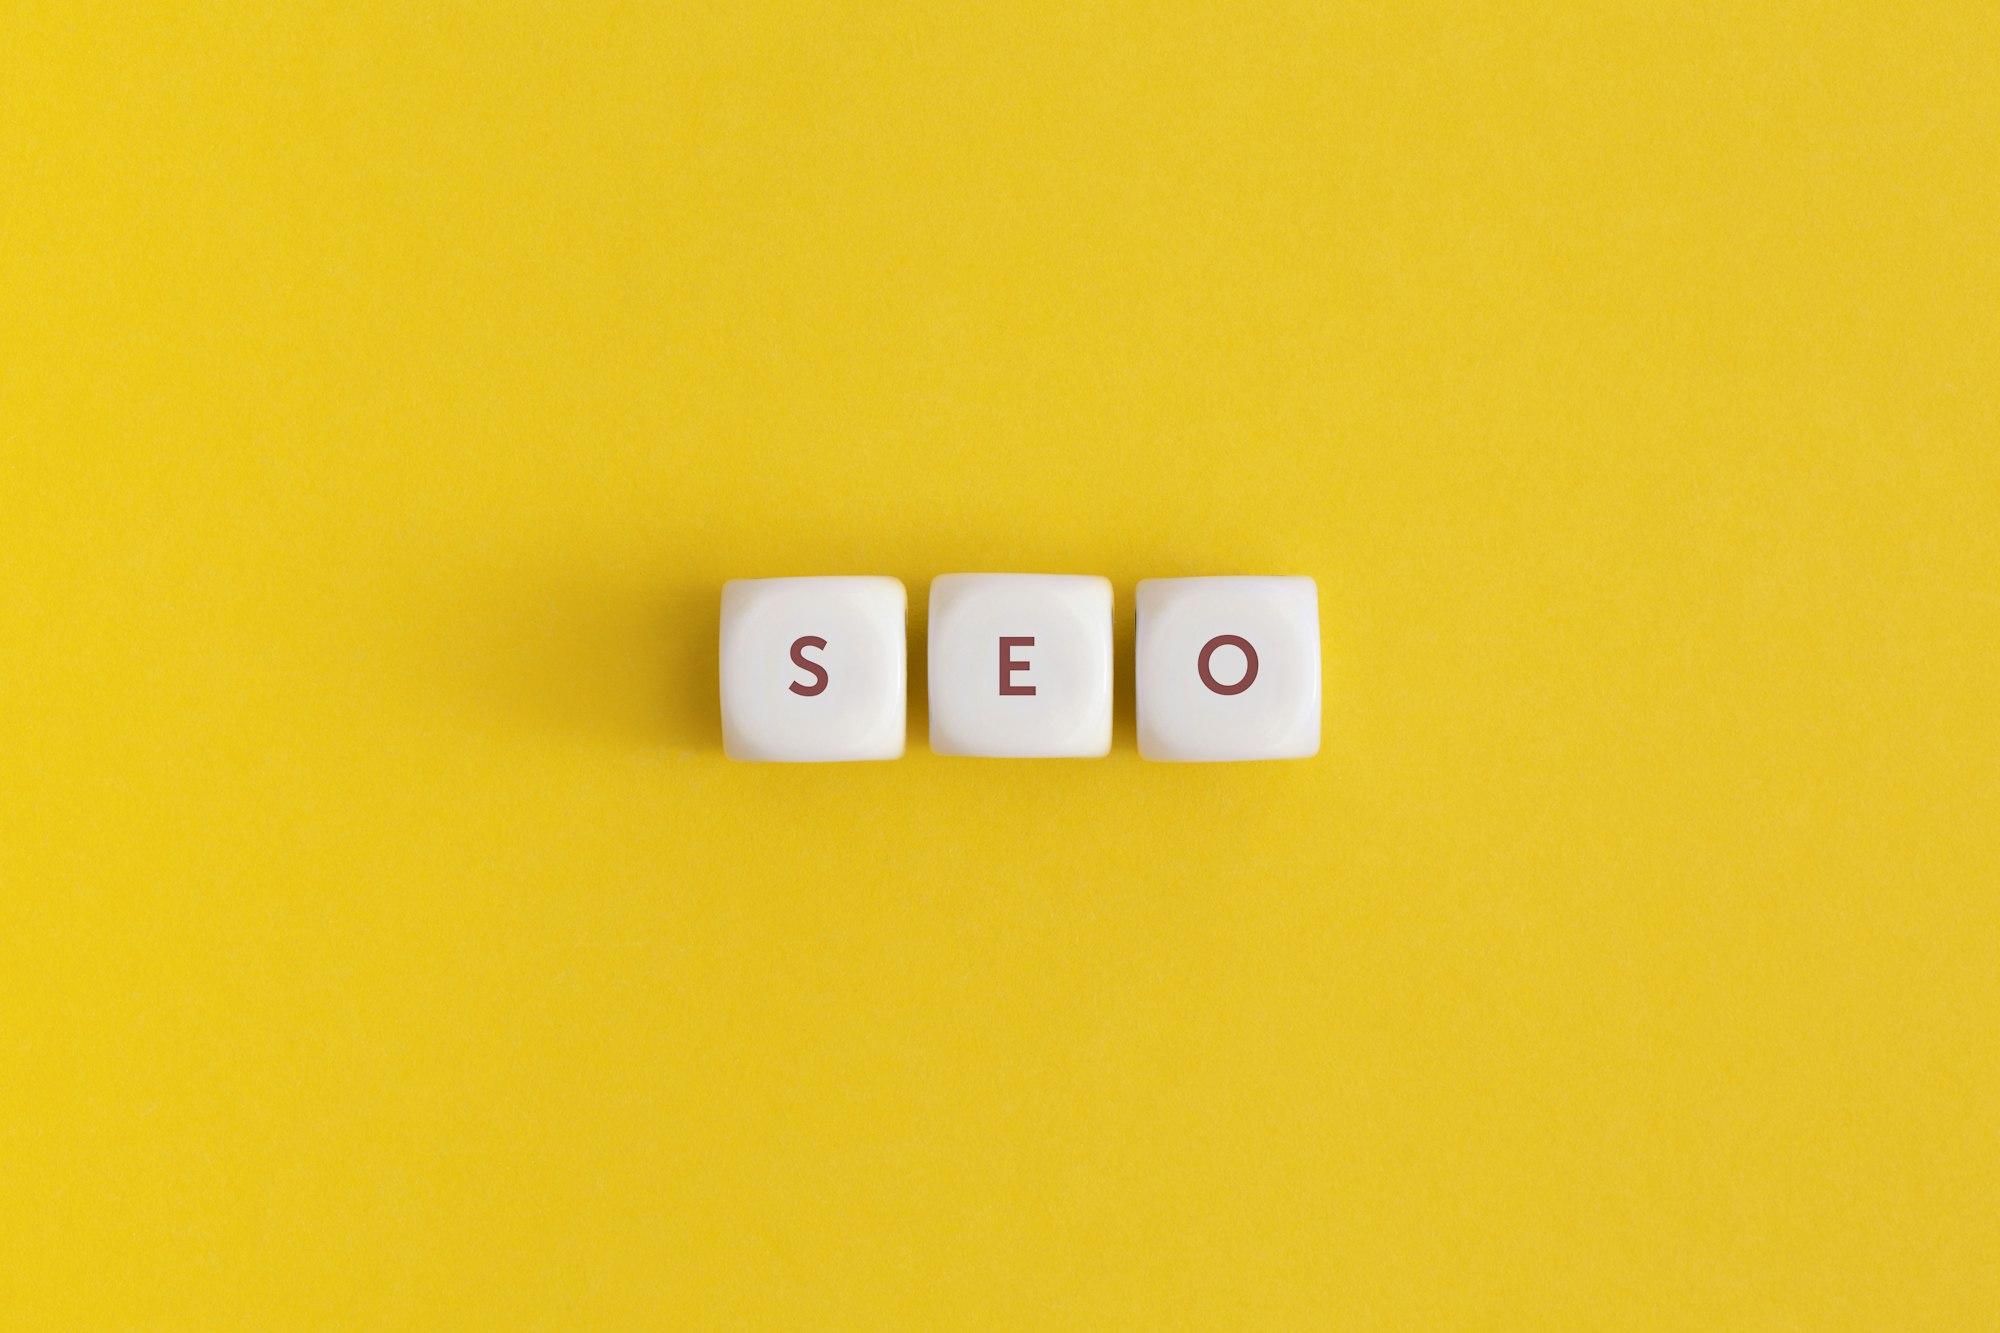 The word seo on yellow background. Top view. Flat lay.